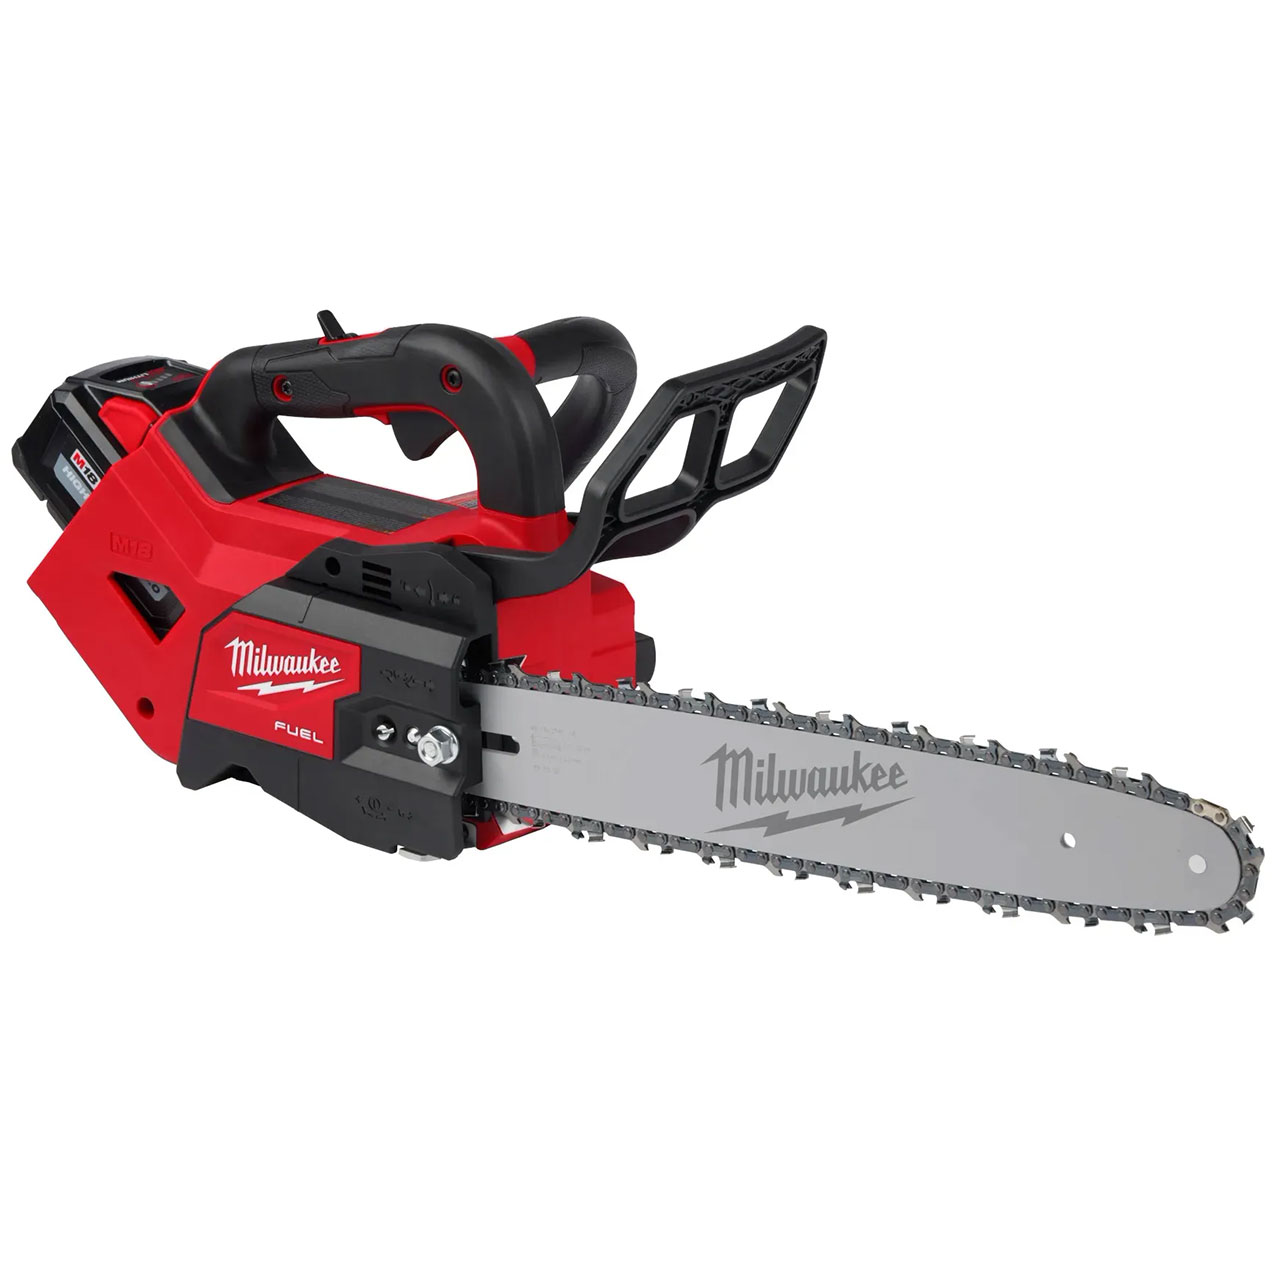 M18 FUEL 14" Top Handle Chainsaw 2